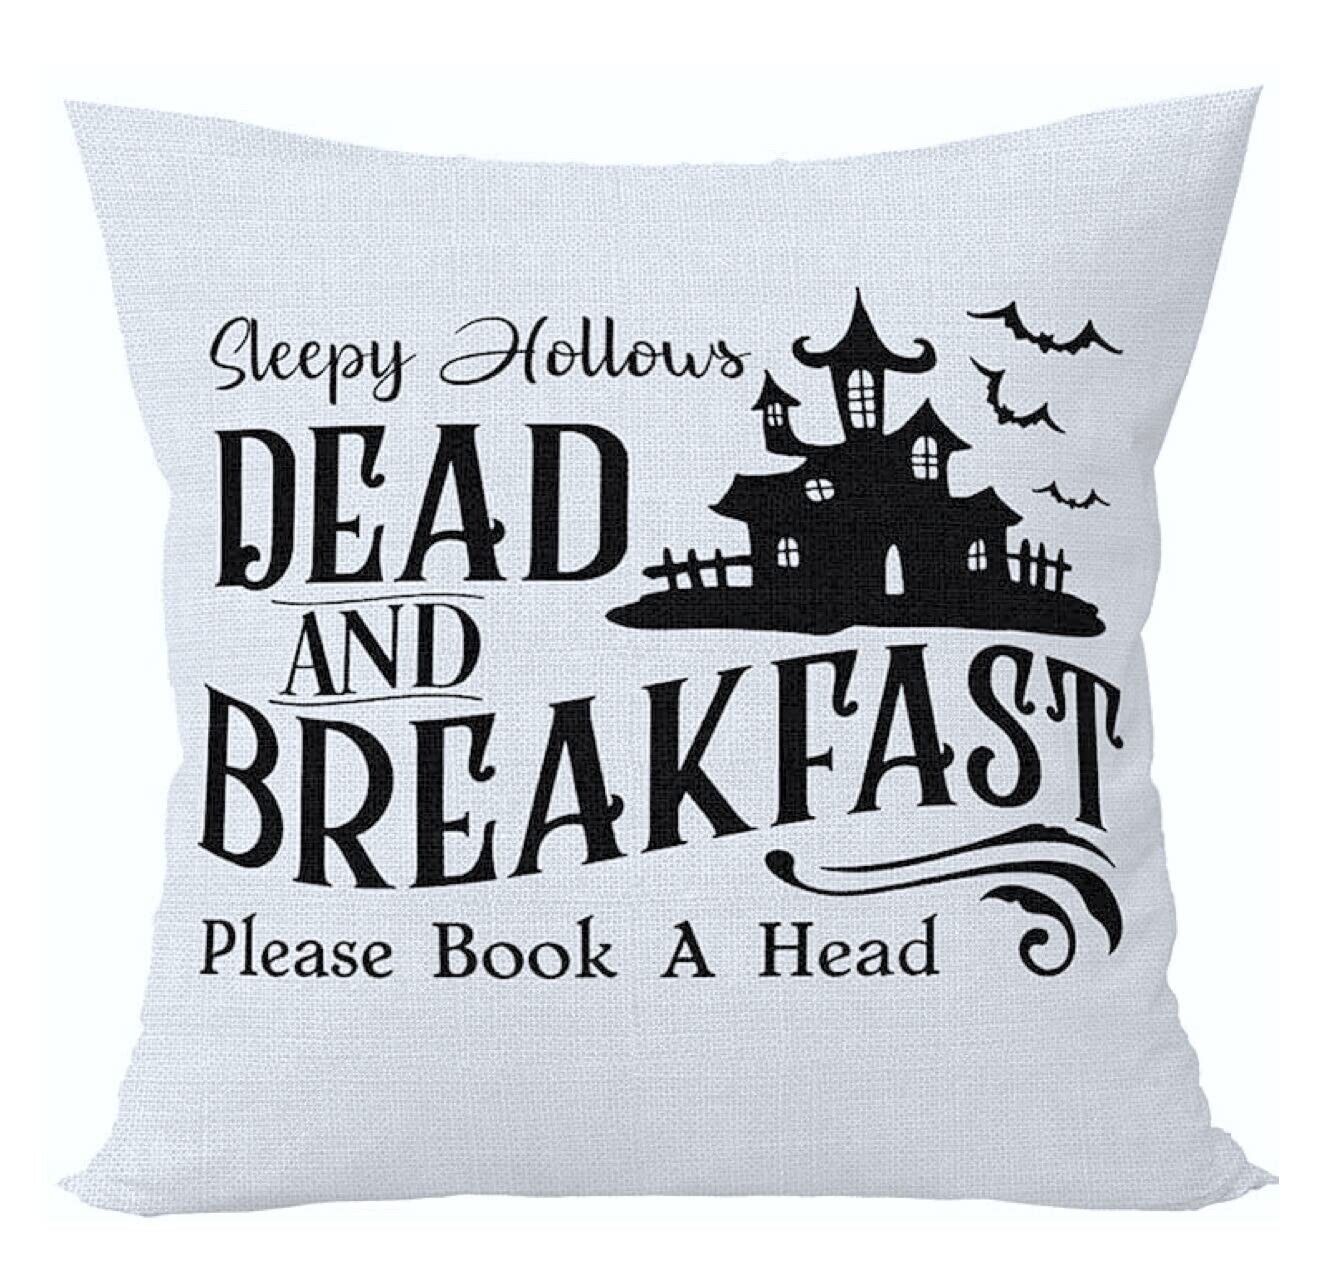 Primary image for Sleepy Hollows Dead & Breakfast Hocus Pocus Decorative Throw Pillow Case Cover